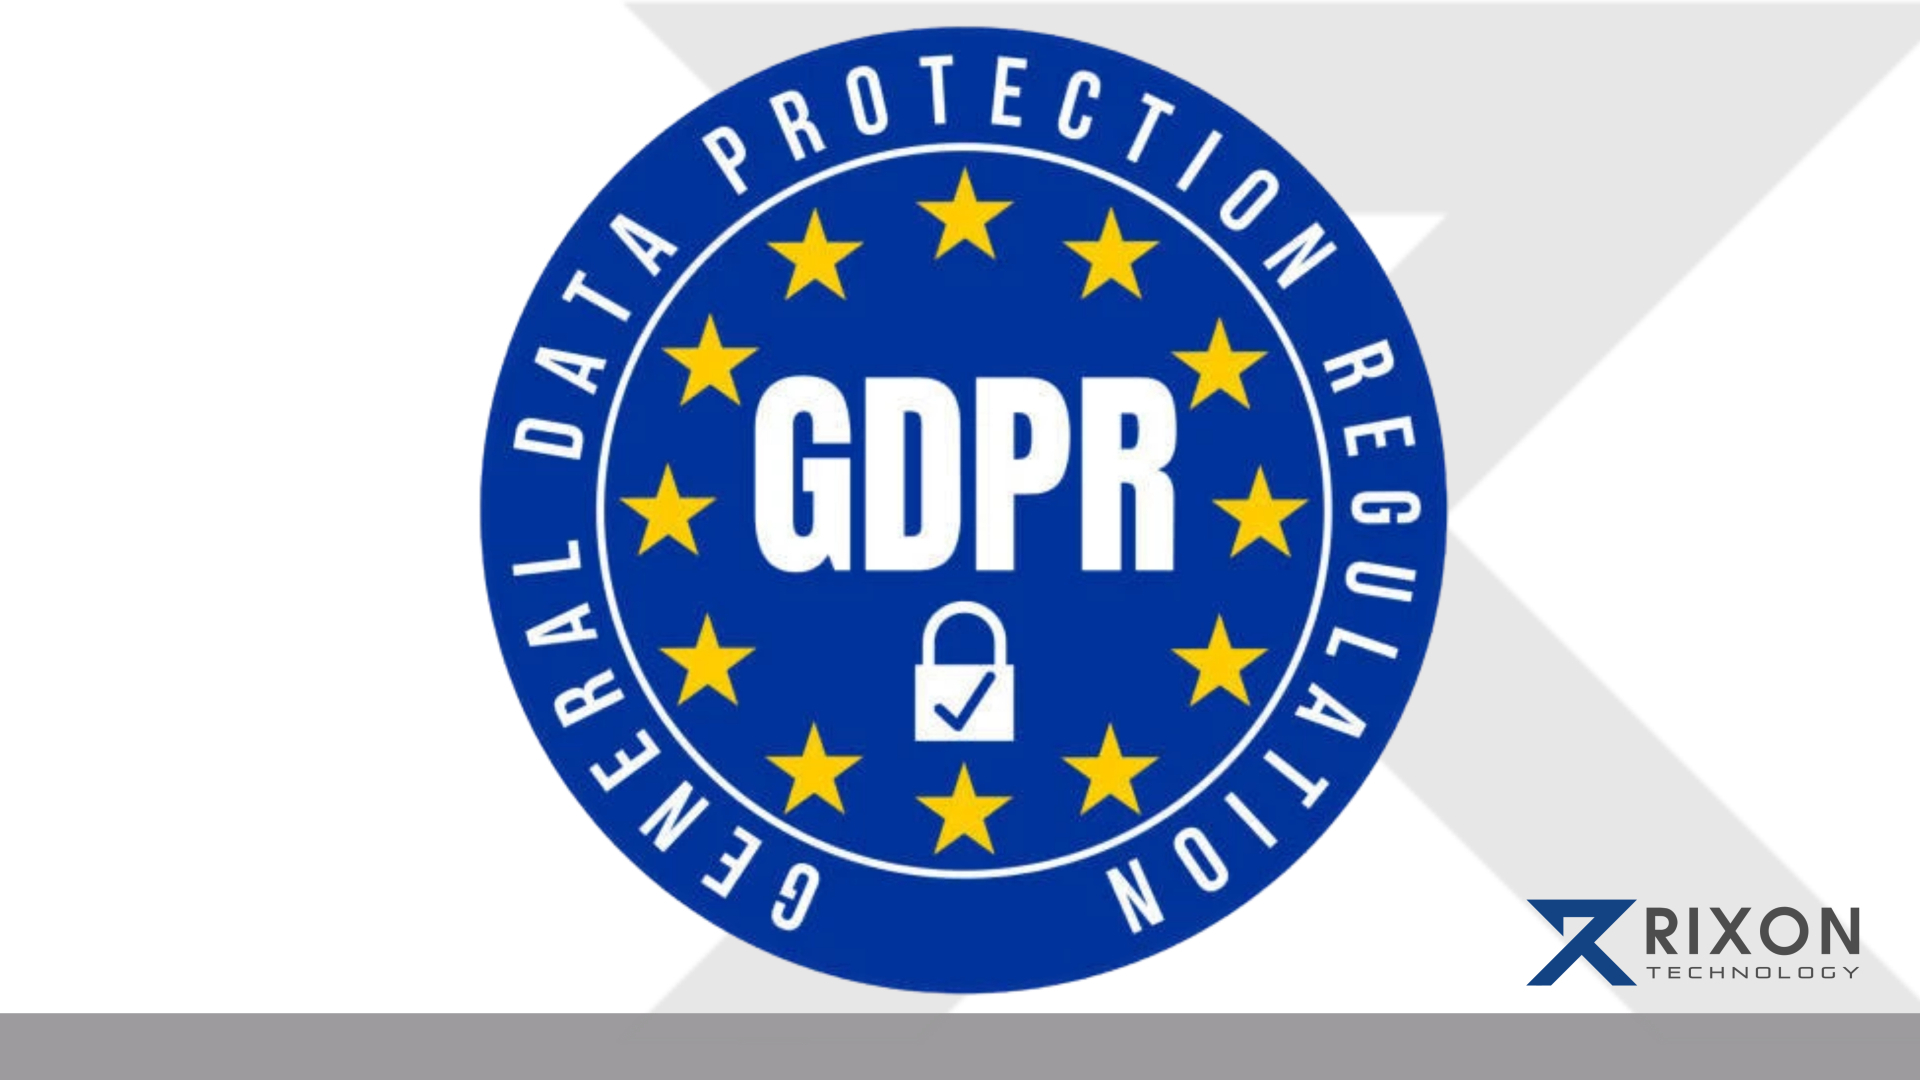 Logo of the General Data Protection Regulation (GDPR) with blue background and yellow stars arranged in a circle, representing the flag of the European Union. Below the logo is the text 'Rixon Technology'.